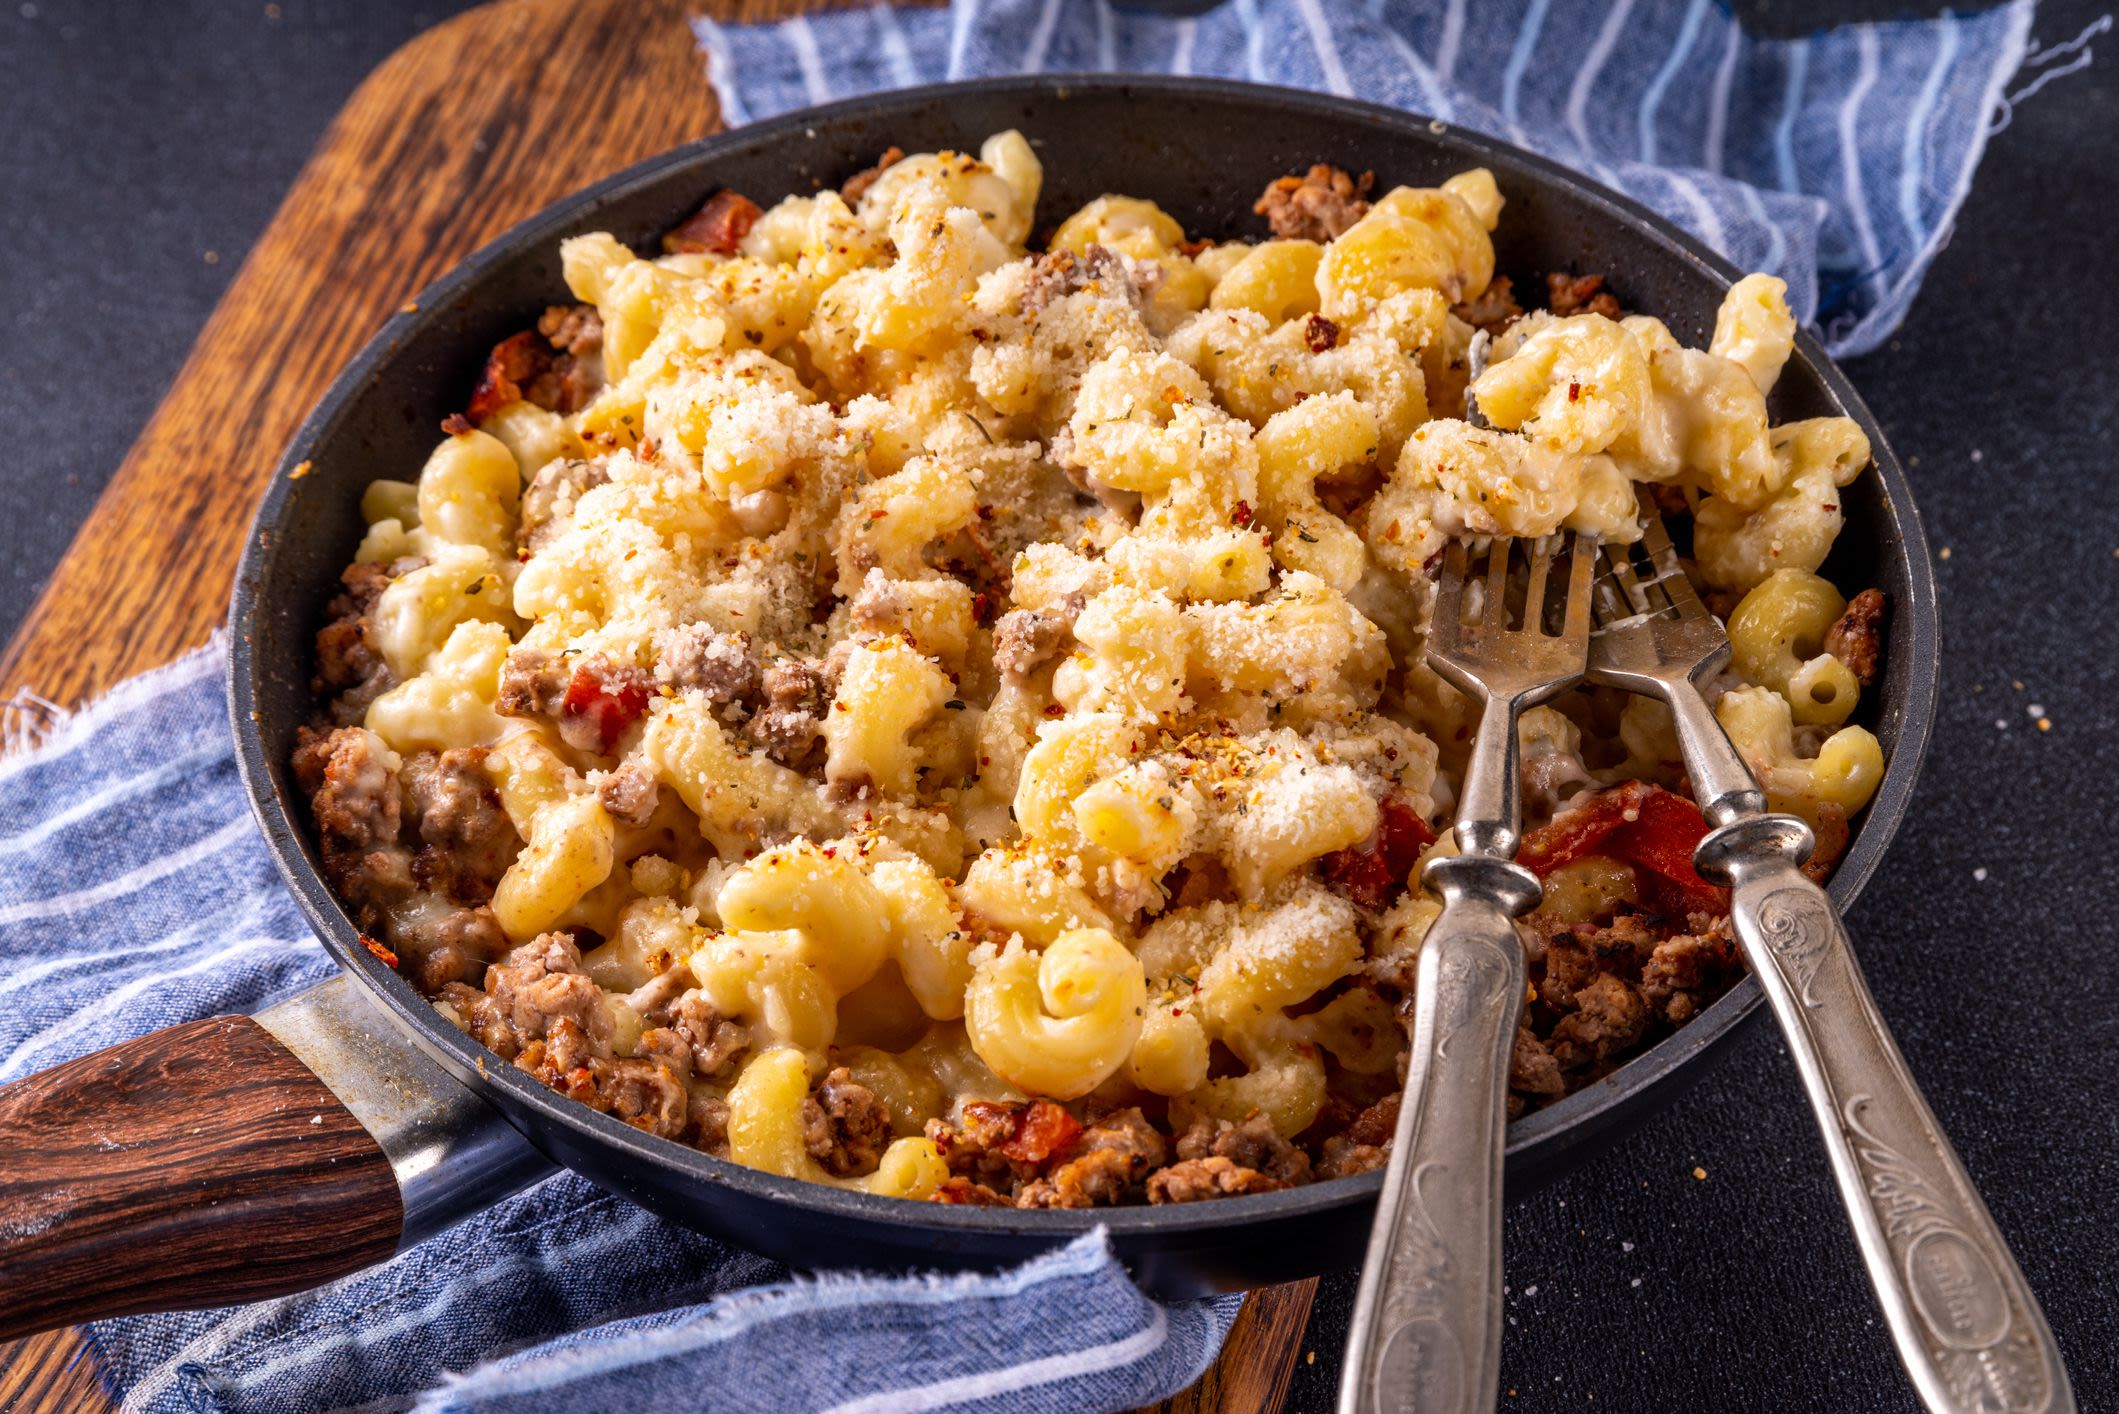 18 Easy Yet Delicious Ground Beef Recipes to Try Out This Weekend